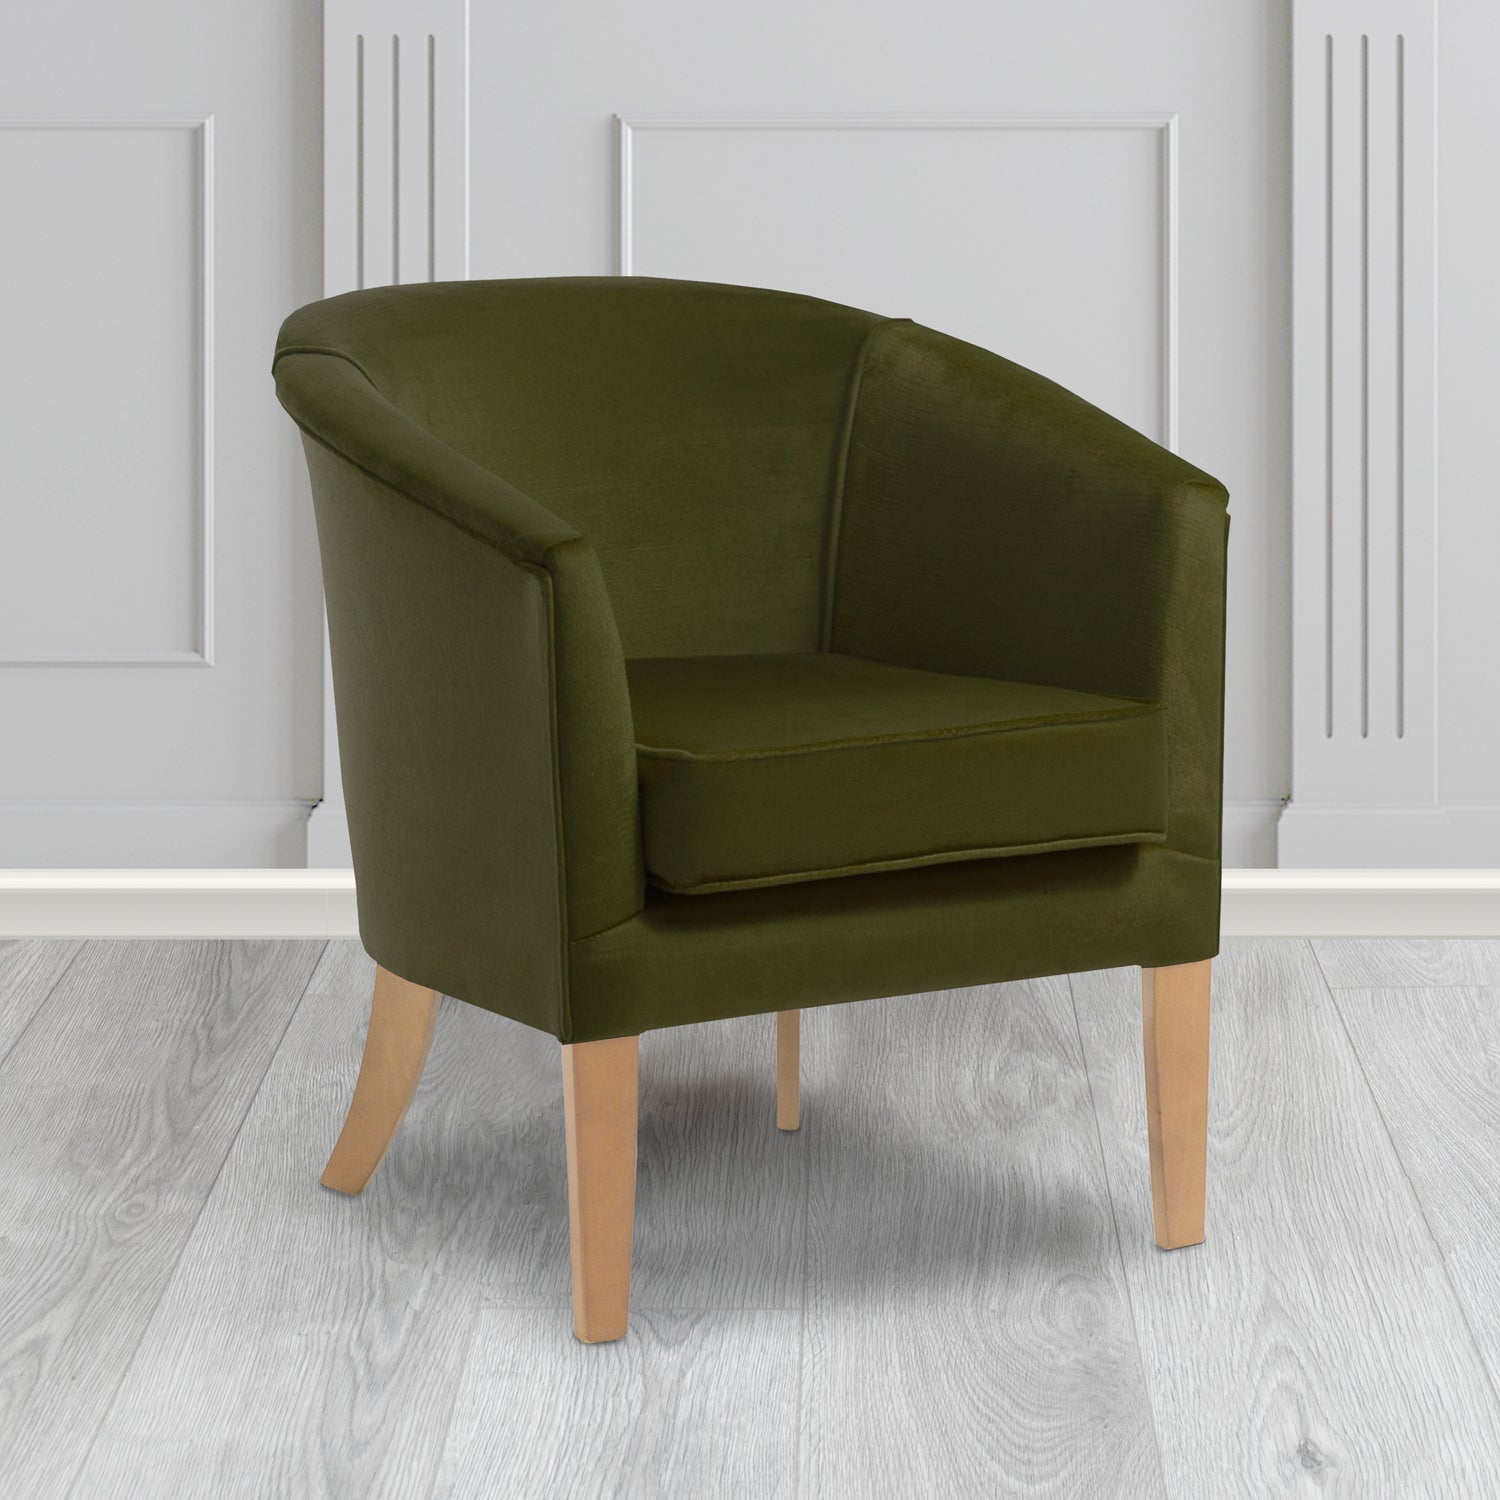 Jazz Tub Chair in Noble 204 Moss Crib 5 Velvet Fabric - Water Resistant - The Tub Chair Shop